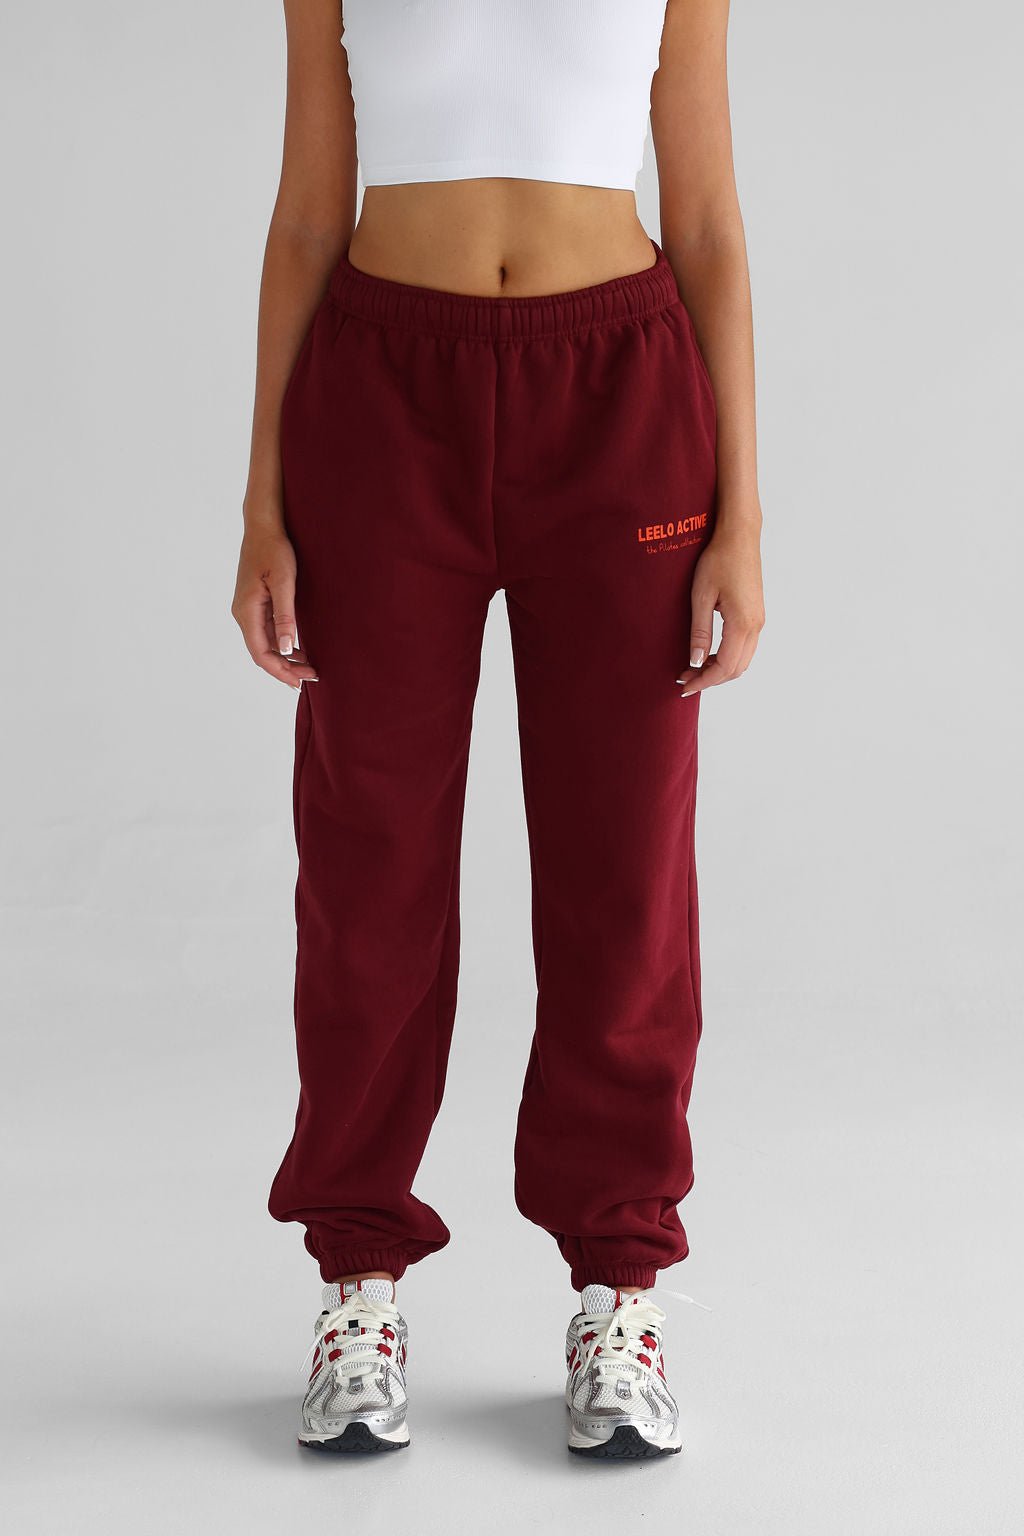 The Pilates Collection Cuffed Sweatpants - Cherry Cola - LEELO ACTIVE